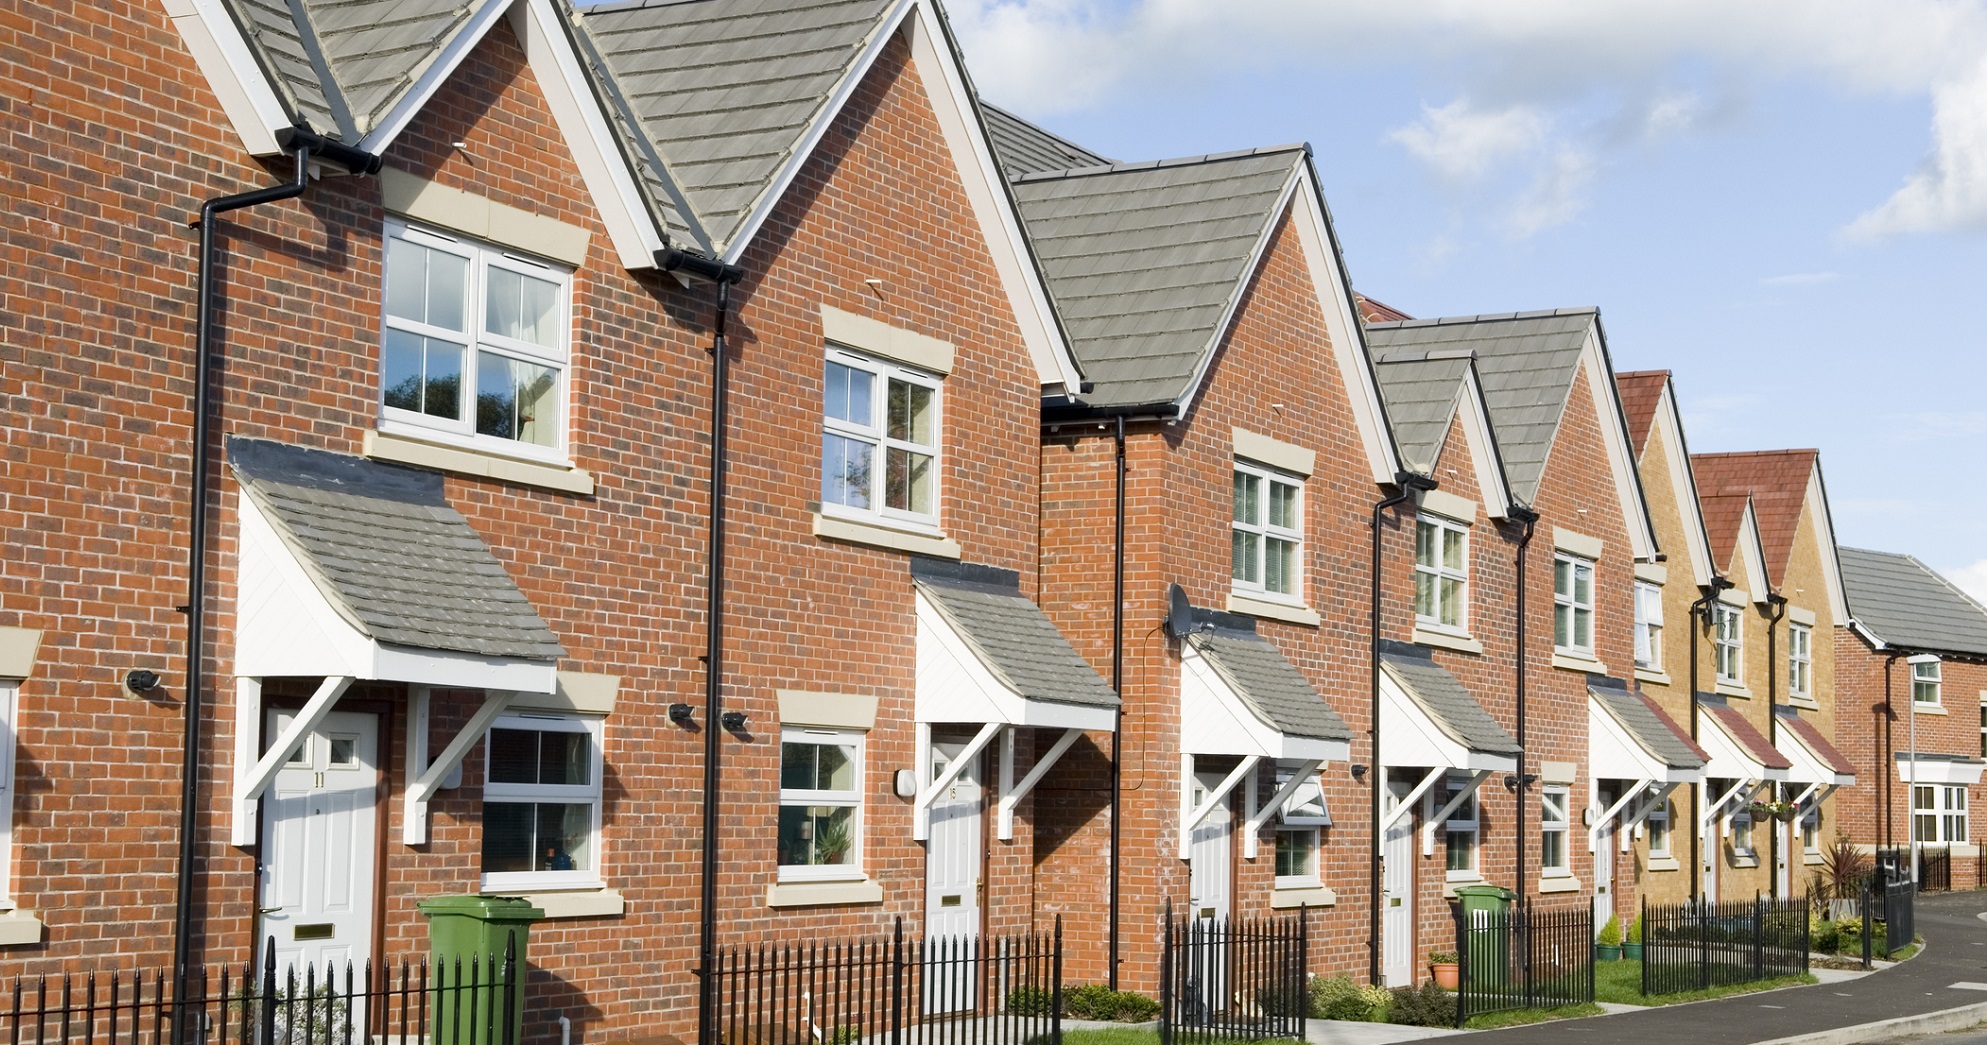 Labour plans to end ‘rip-off’ leasehold ownership with sales ban on new homes - https://roomslocal.co.uk/blog/labour-plans-to-end-rip-off-leasehold-ownership-with-sales-ban-on-new-homes #plans #leasehold #ownership #with #sales